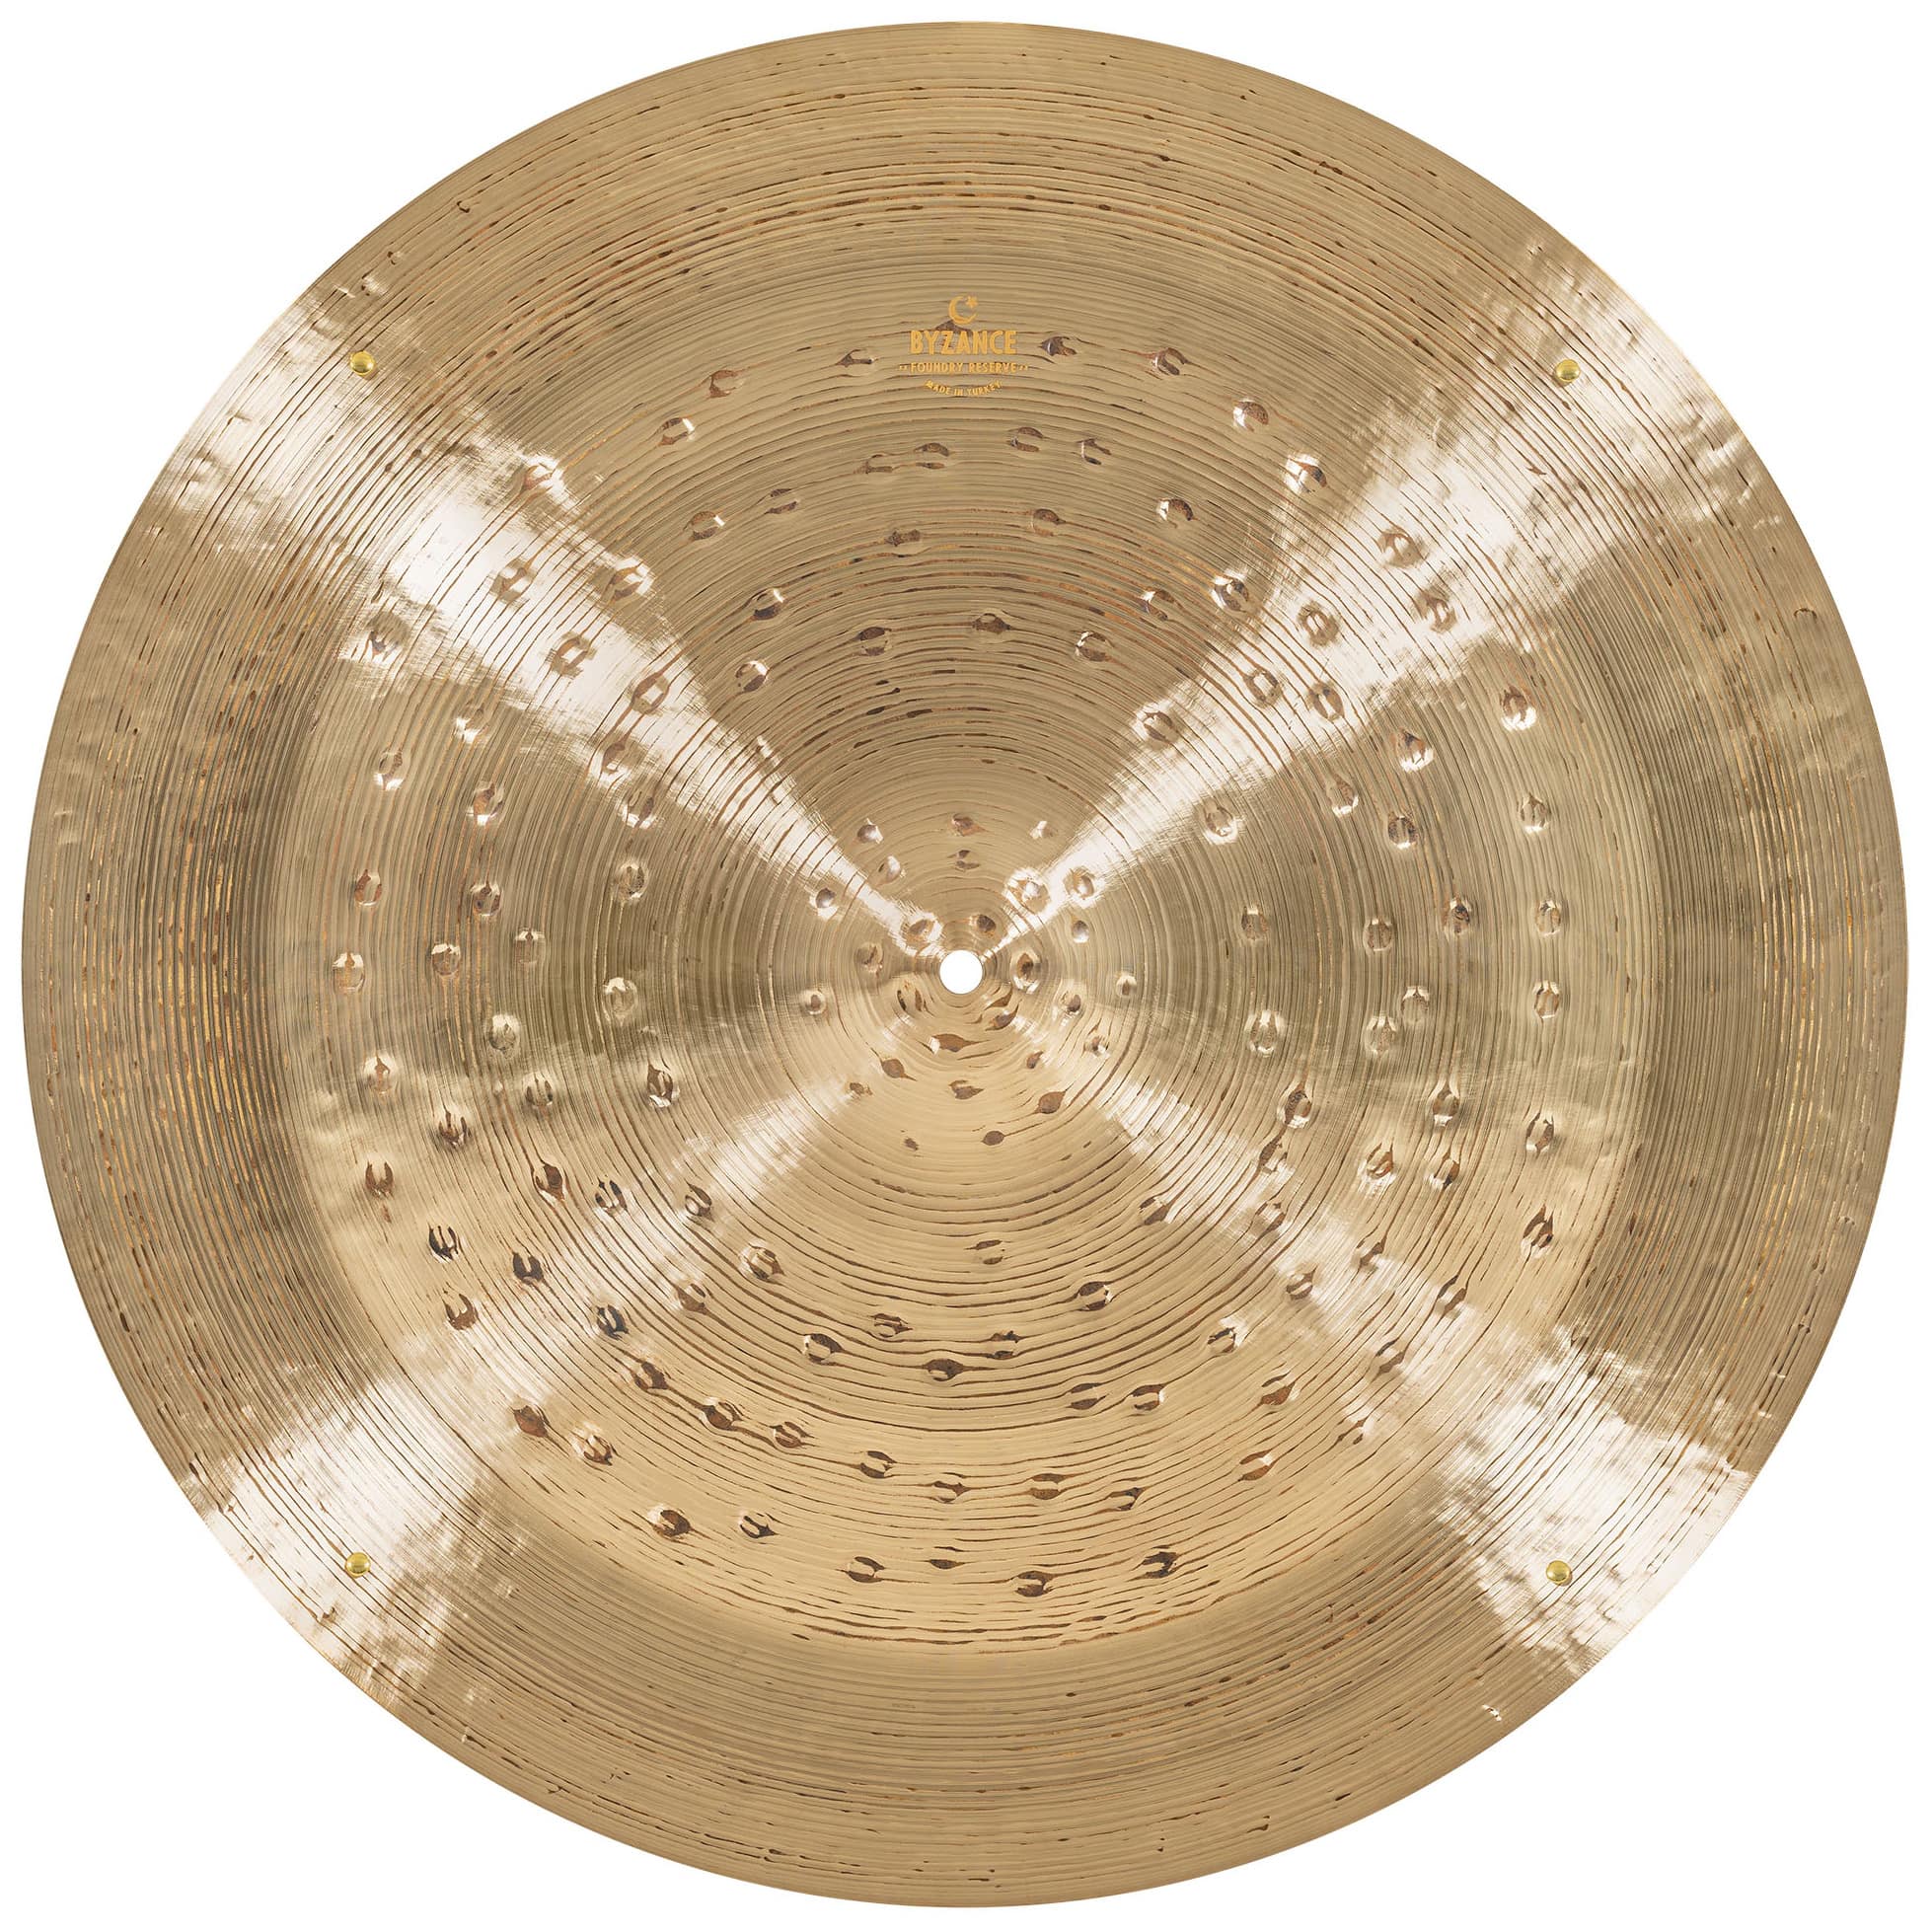 Meinl Cymbals B22FRCHR - 22" Byzance Foundry Reserve China Ride